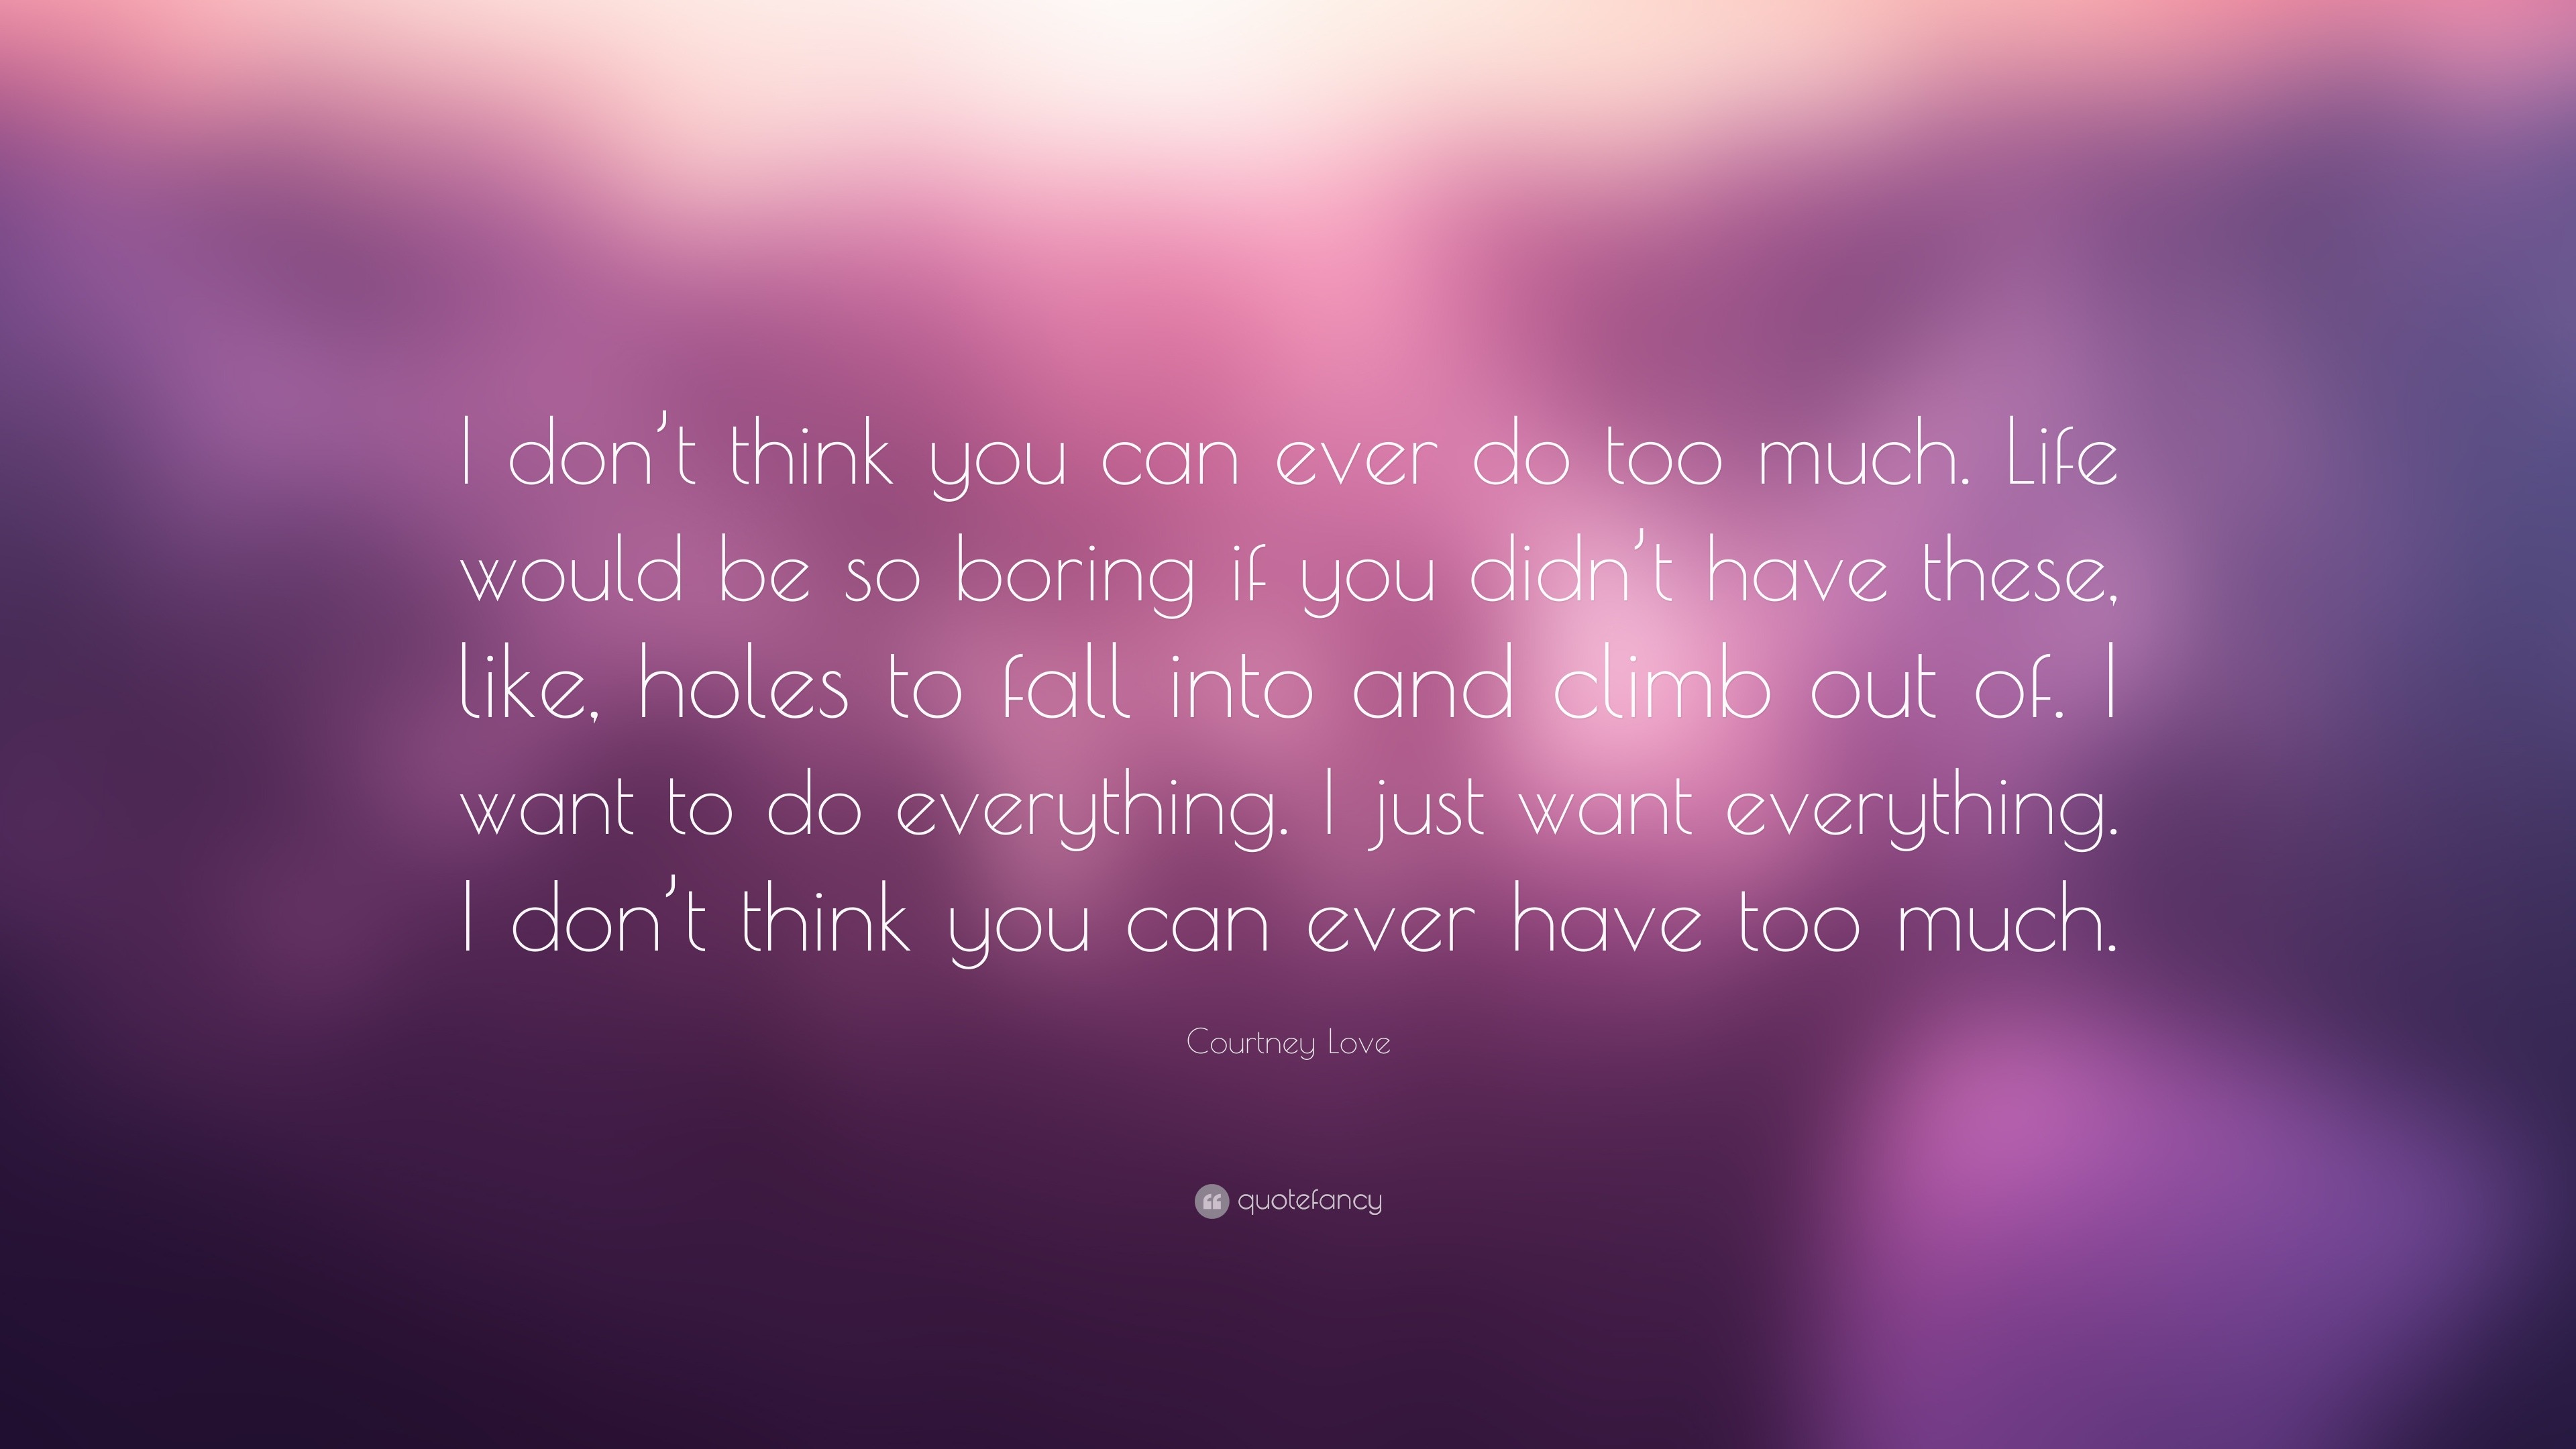 Courtney Love Quote “I don t think you can ever do too much